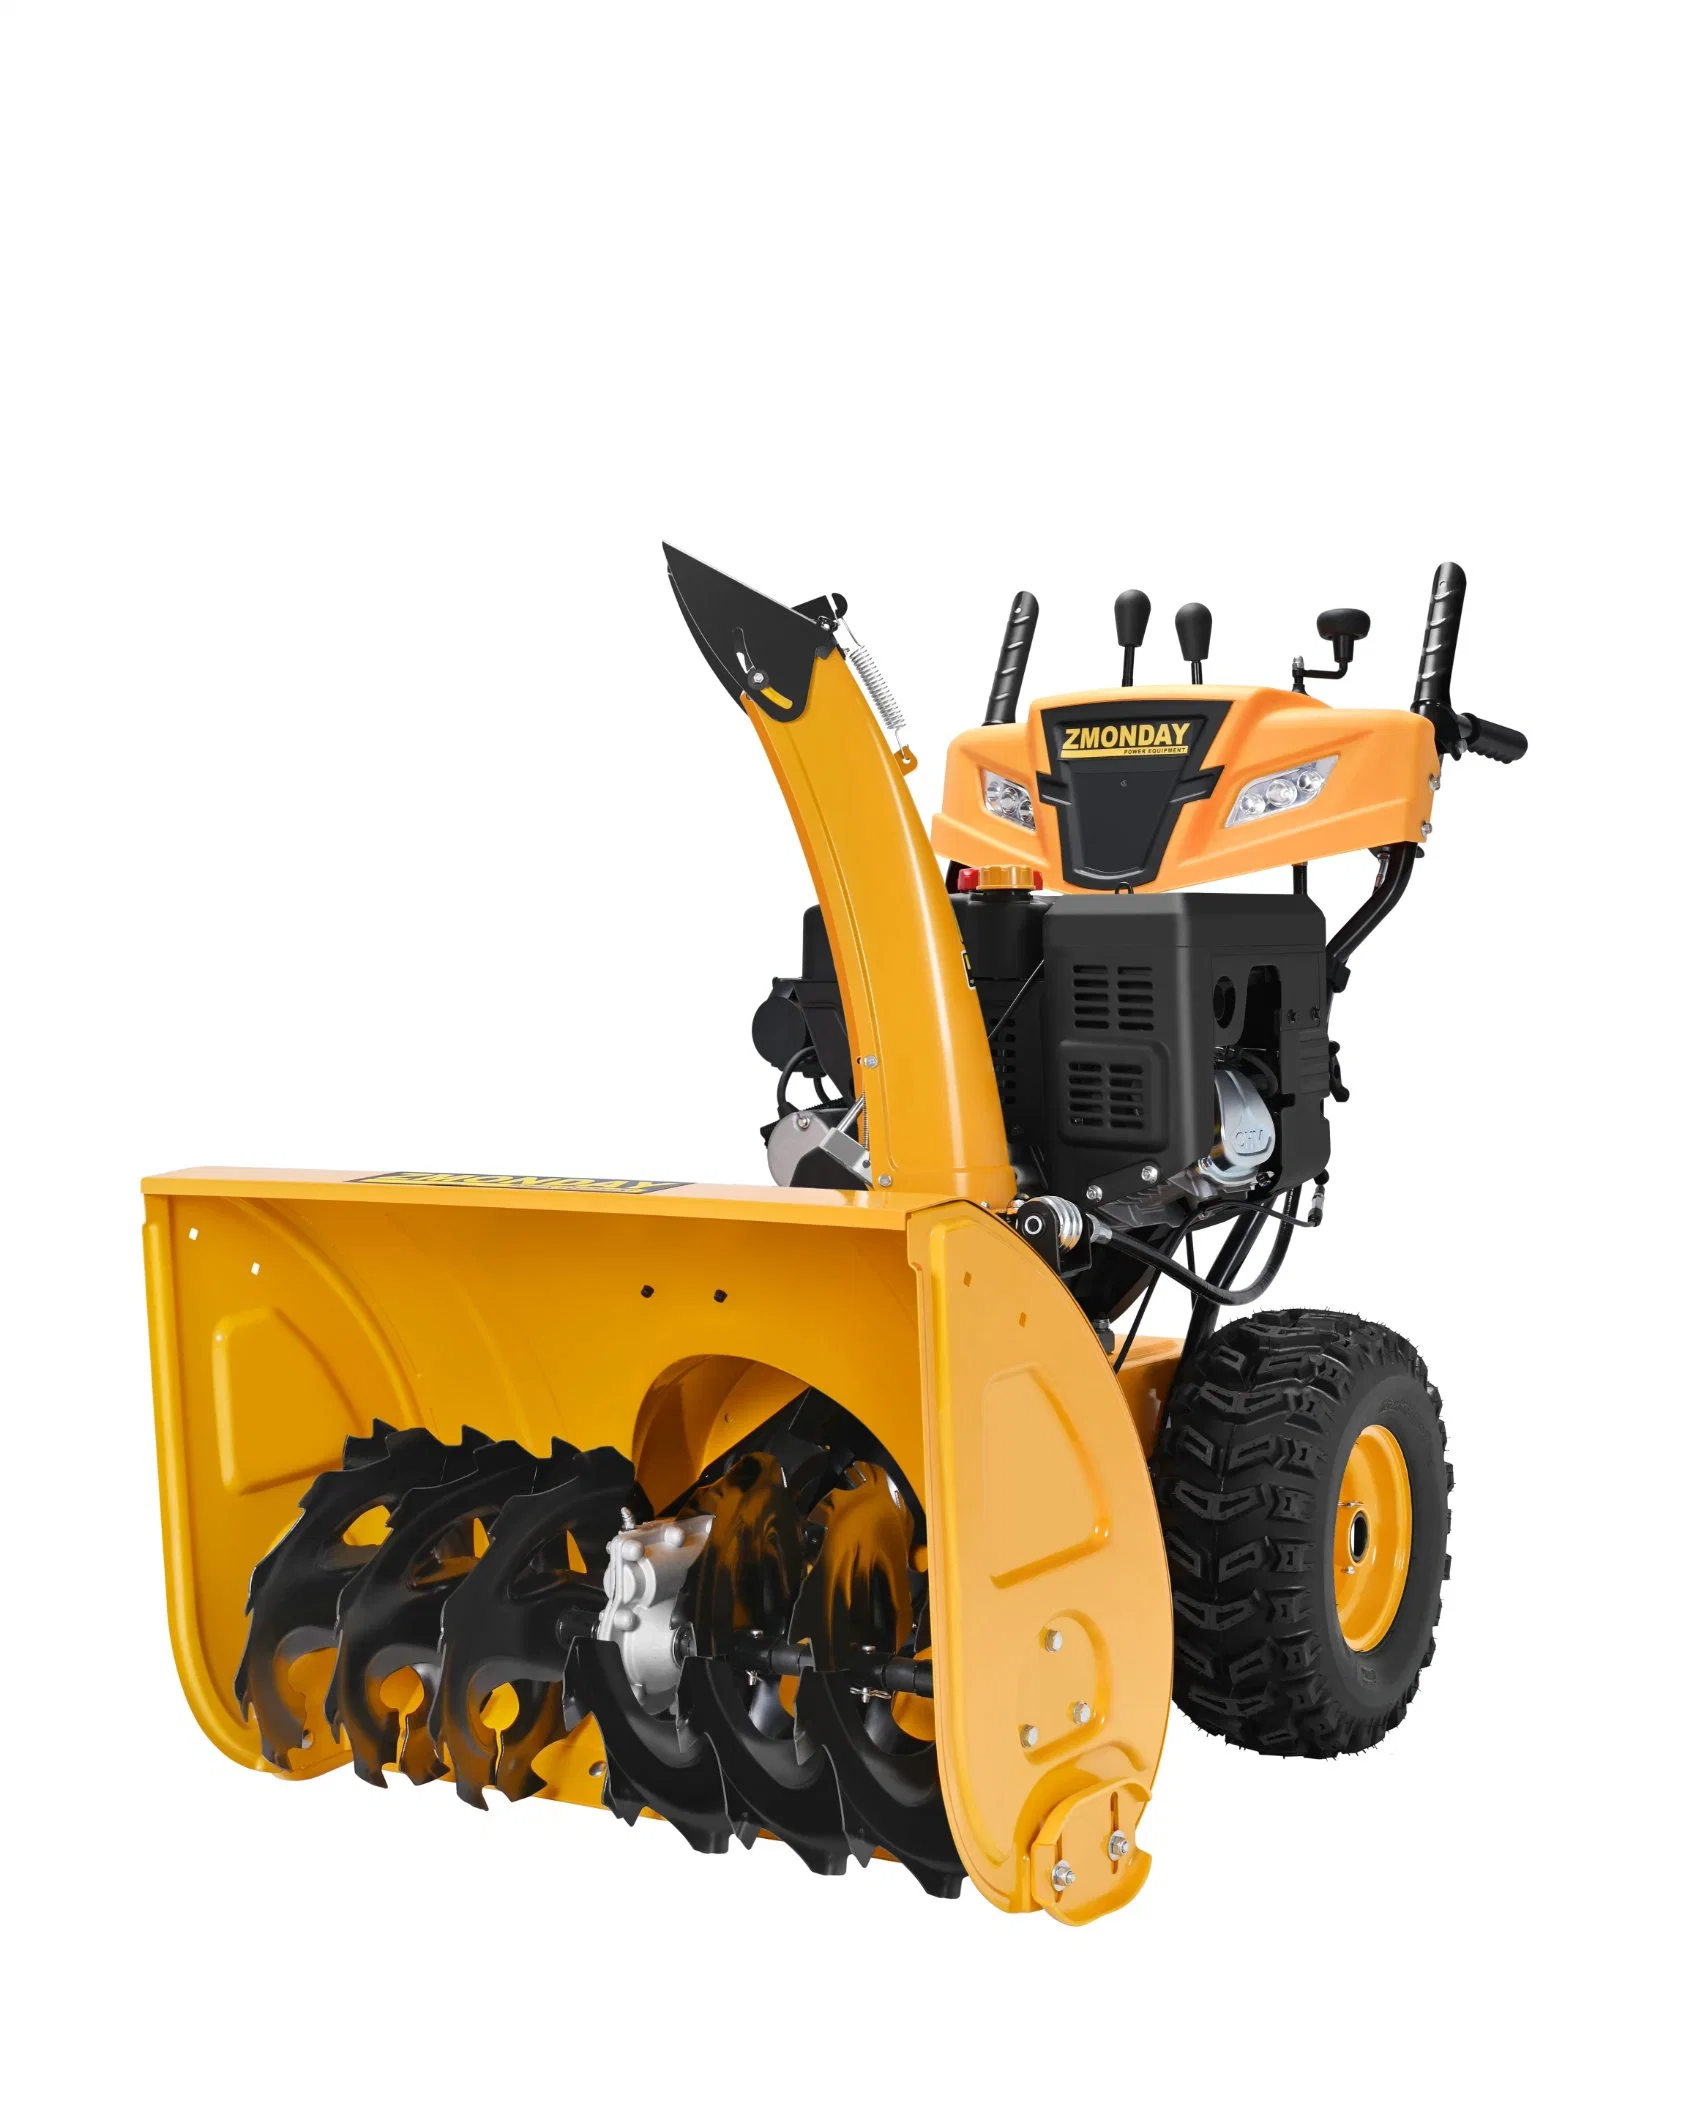 Dual Stage Powerful 11HP Self-Propelled Gasoline Snow Blower/Thrower with New Panel